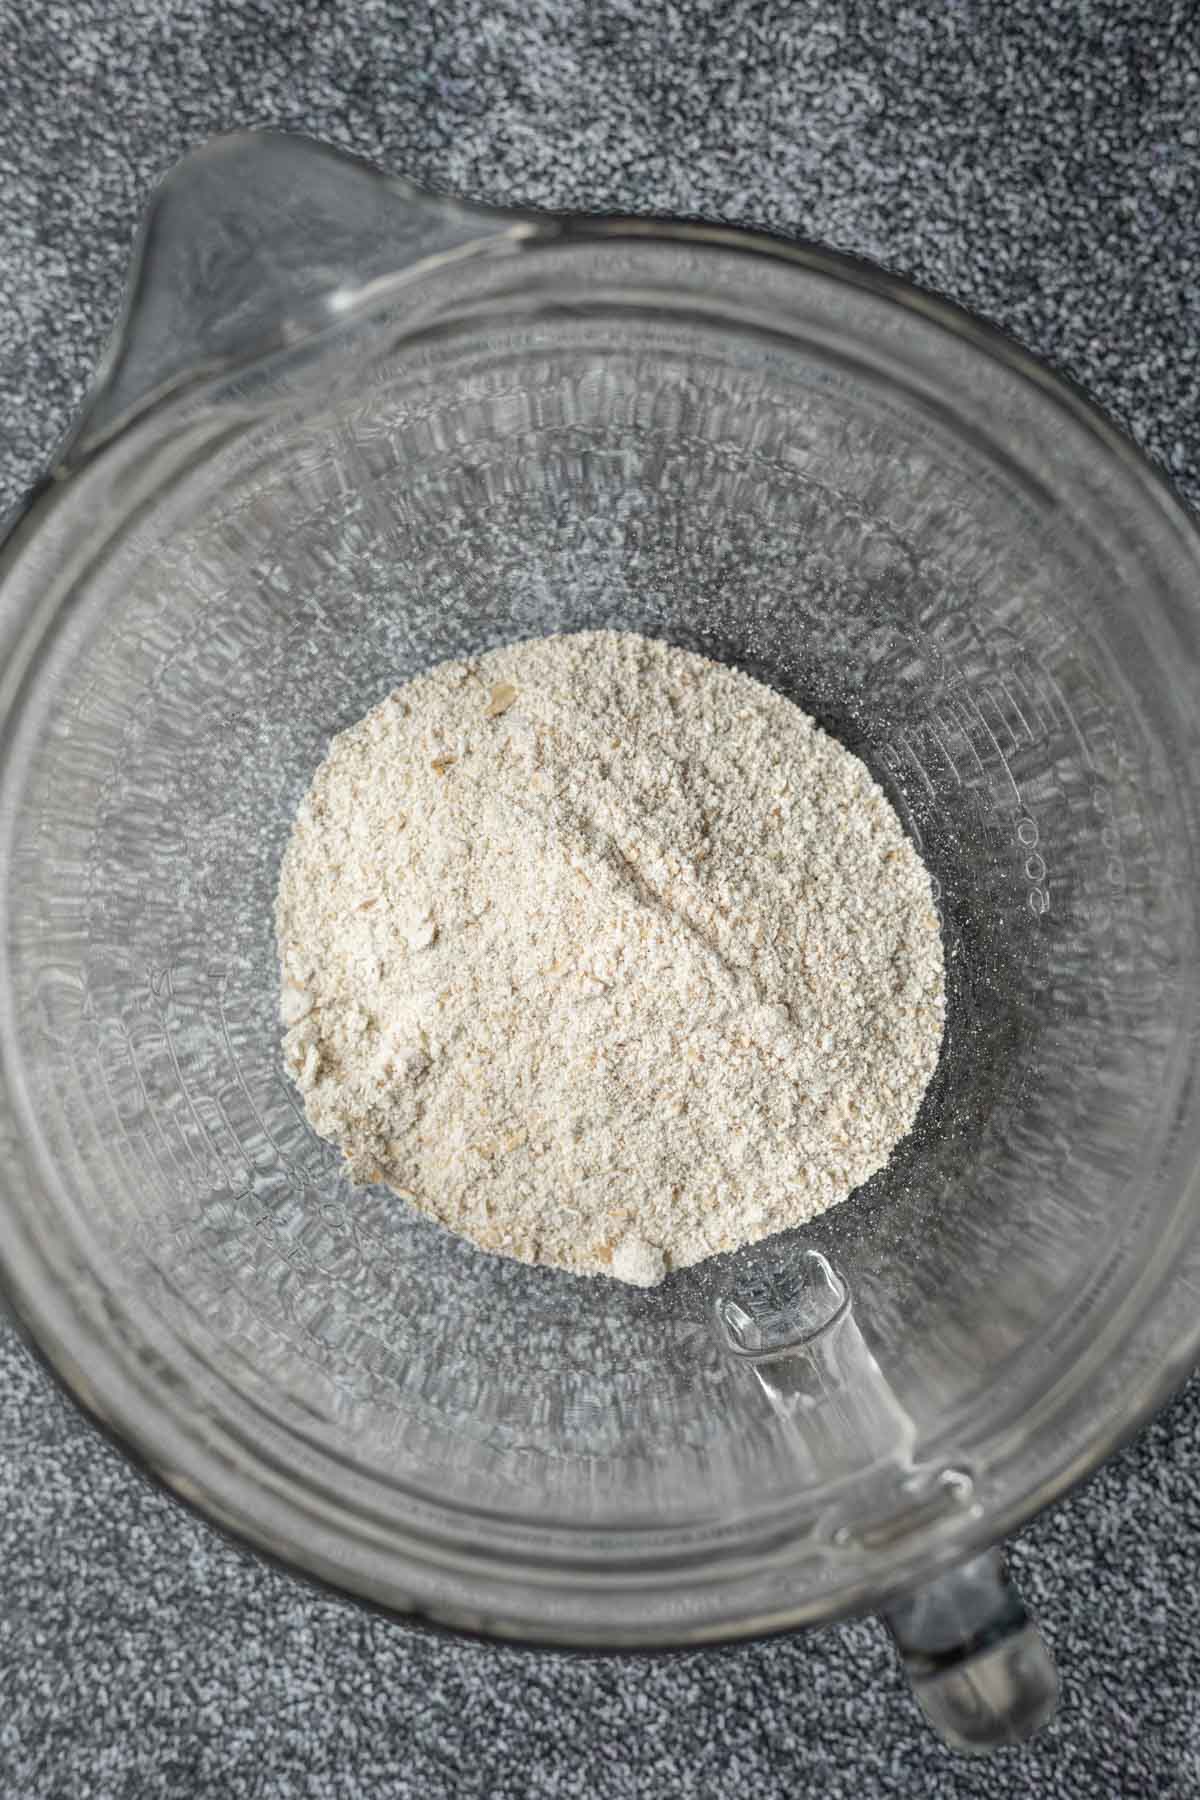 Rolled oats that have been blended into flour in a large mixing bowl.